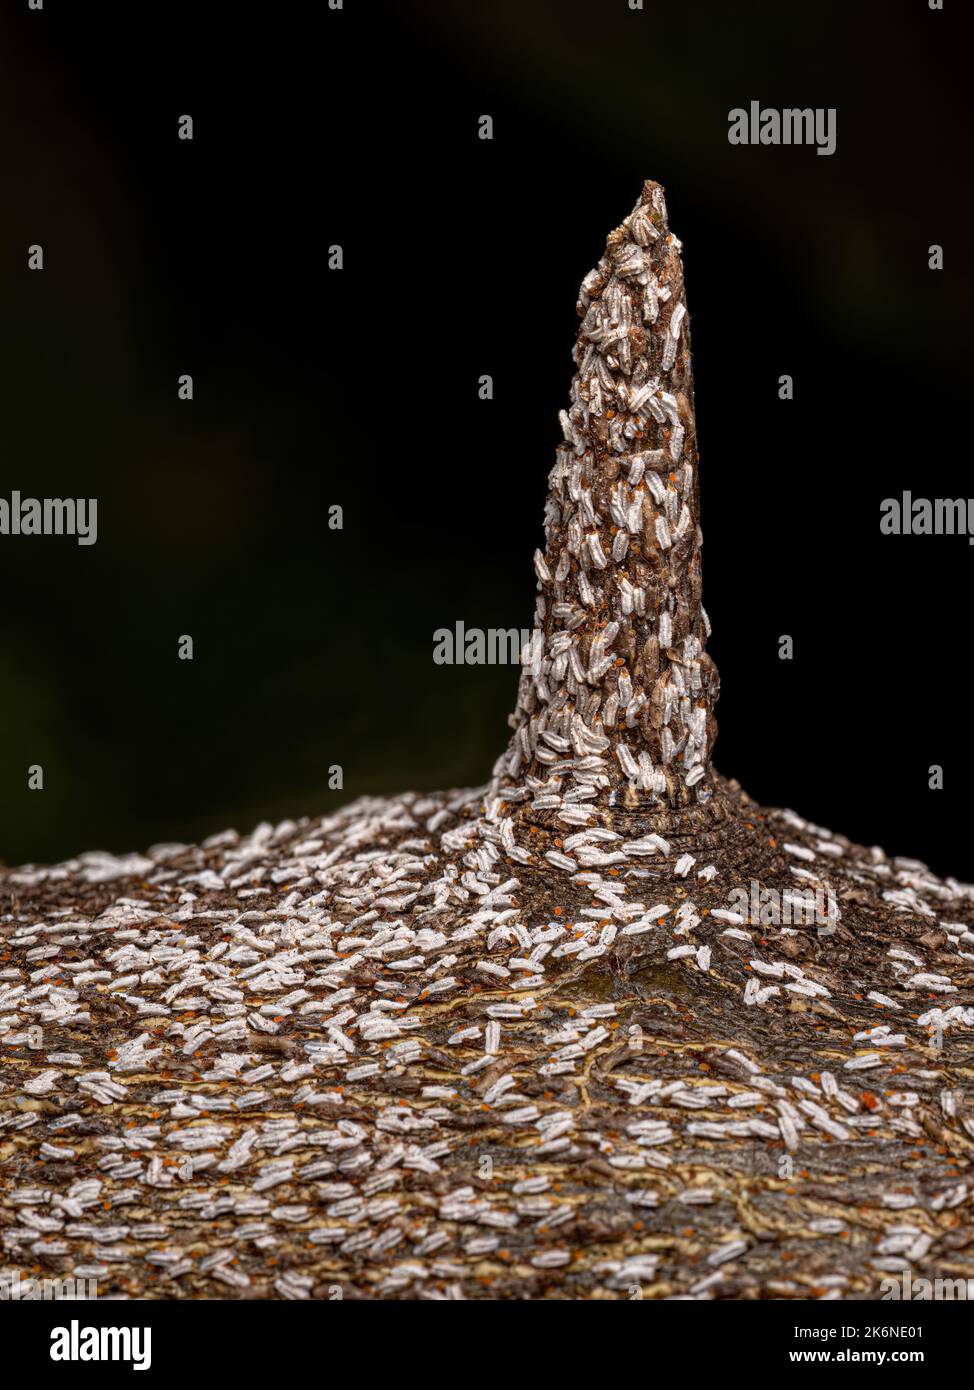 Citrus Snow Scale Insect of the species Unaspis citri Stock Photo